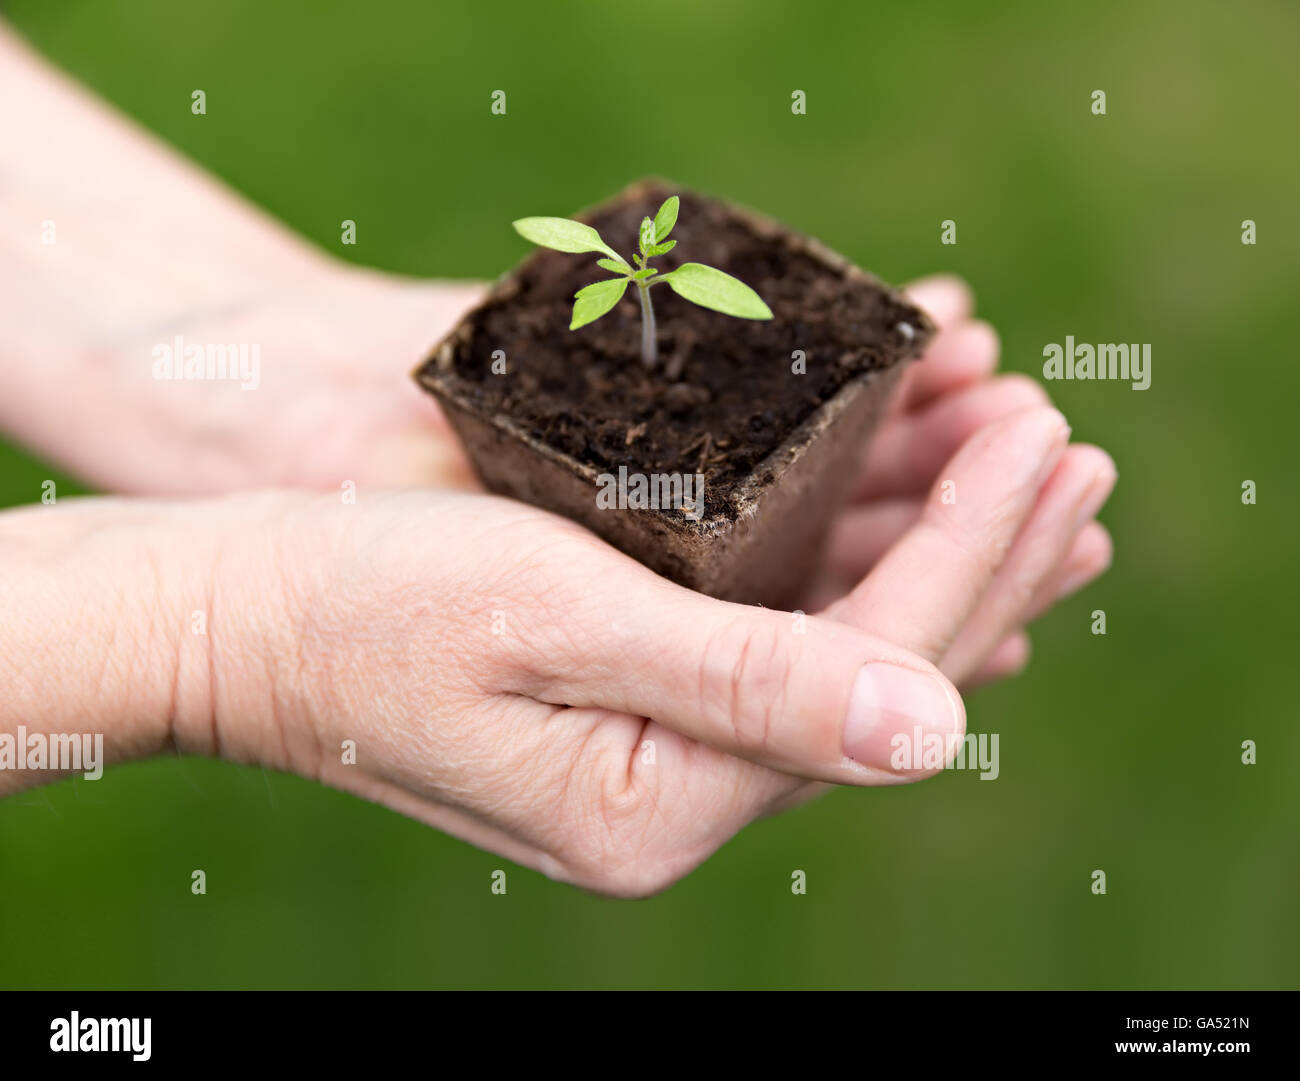 human hands holding small green seedling Stock Photo